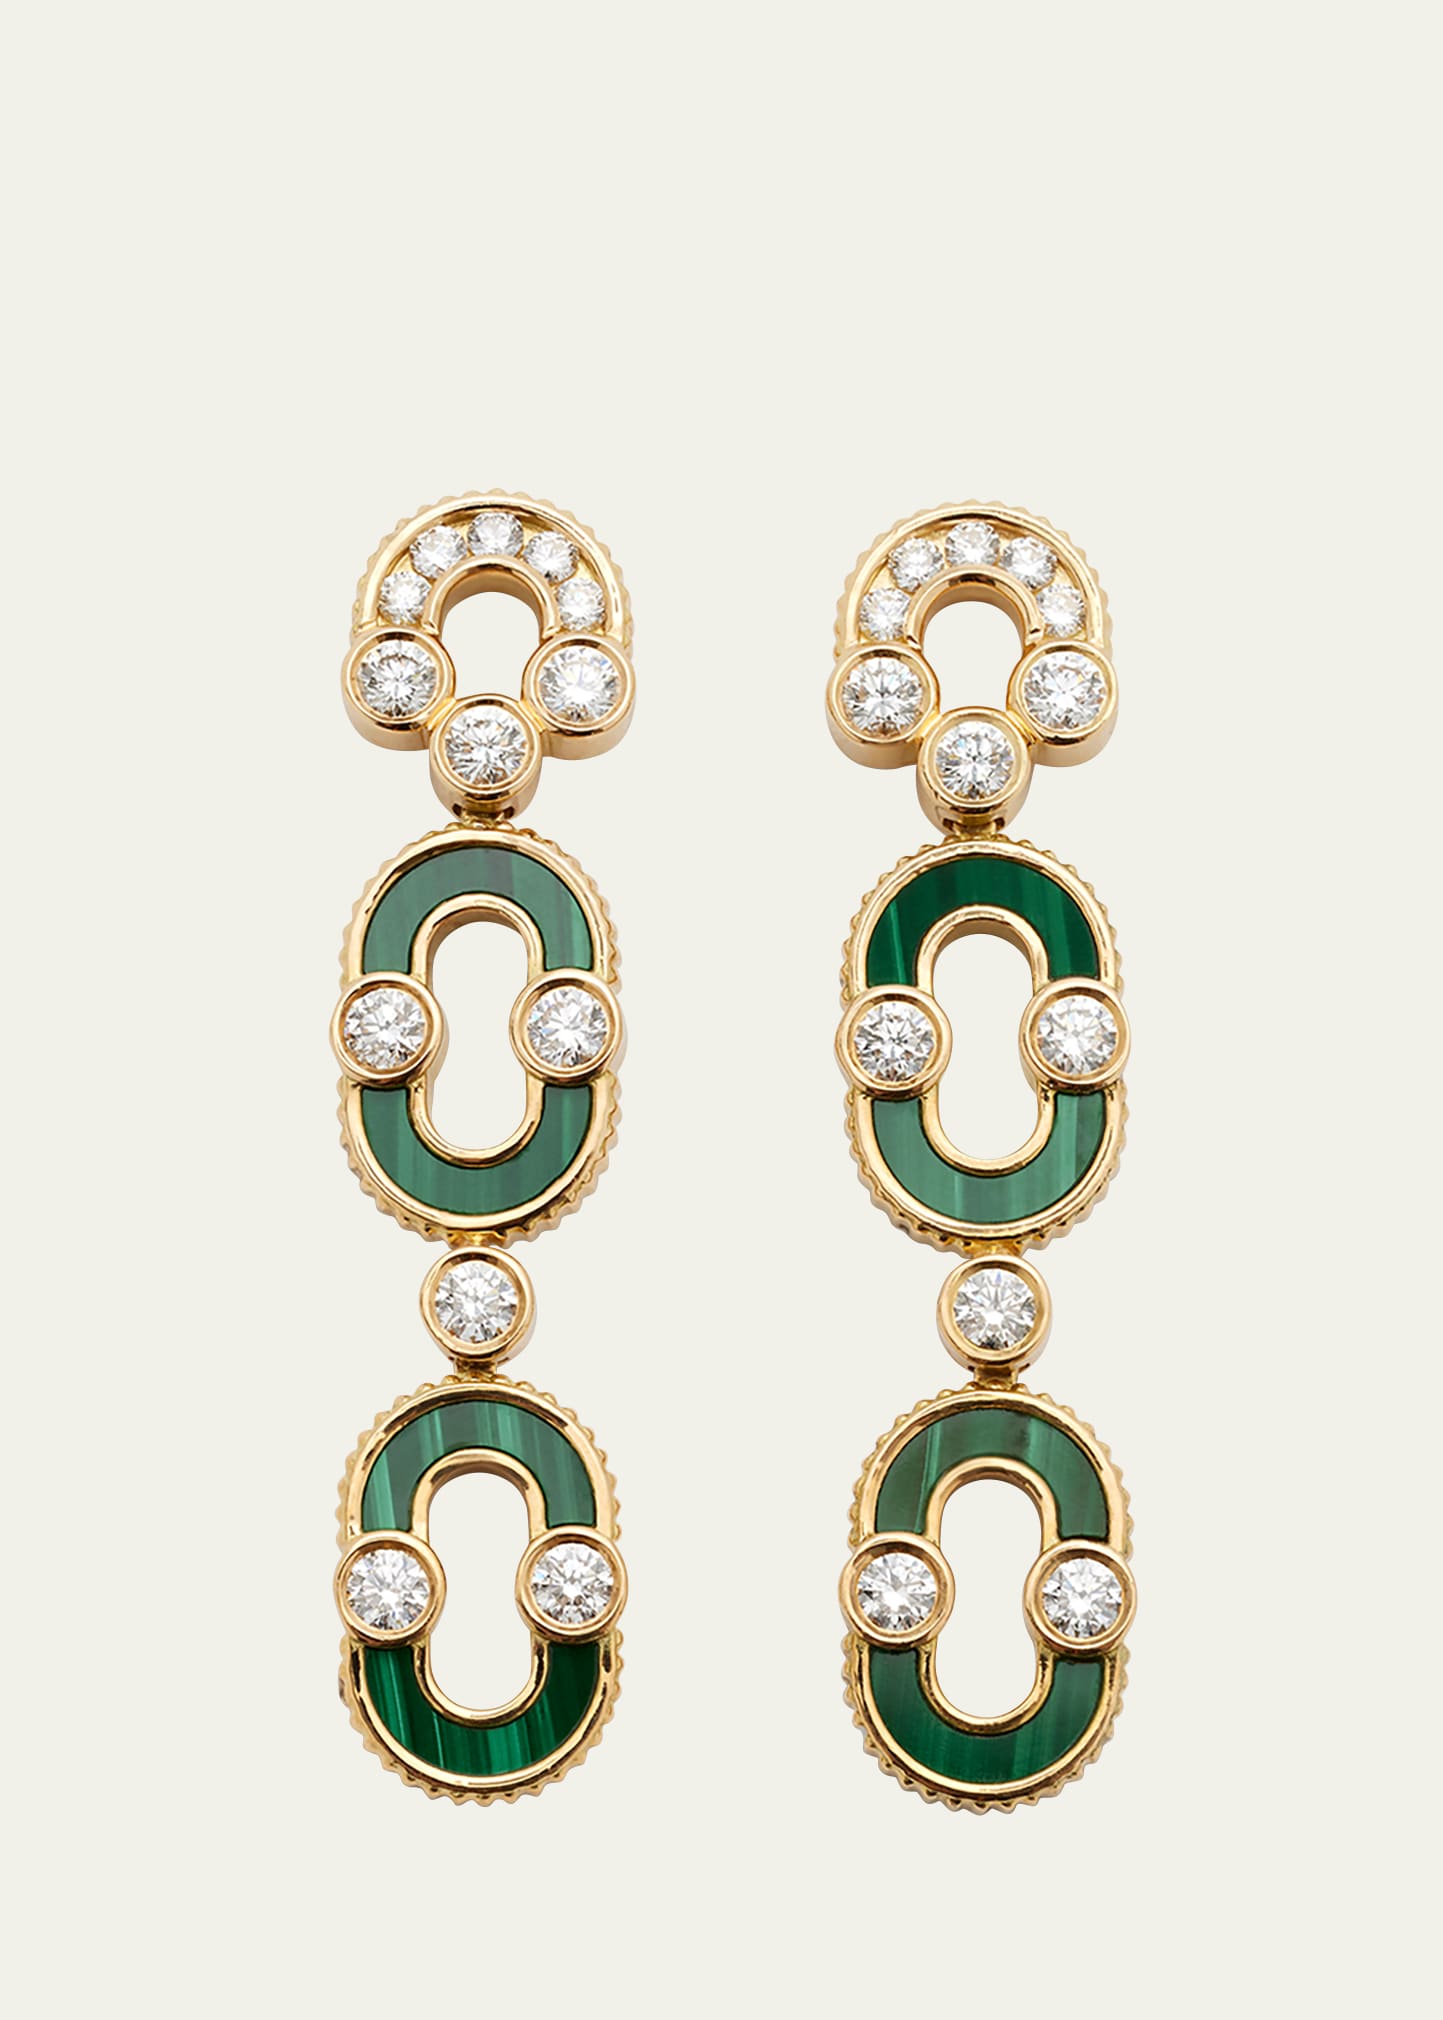 Magnetic Duo Earrings in Malachite, 18K Yellow Gold and Diamonds